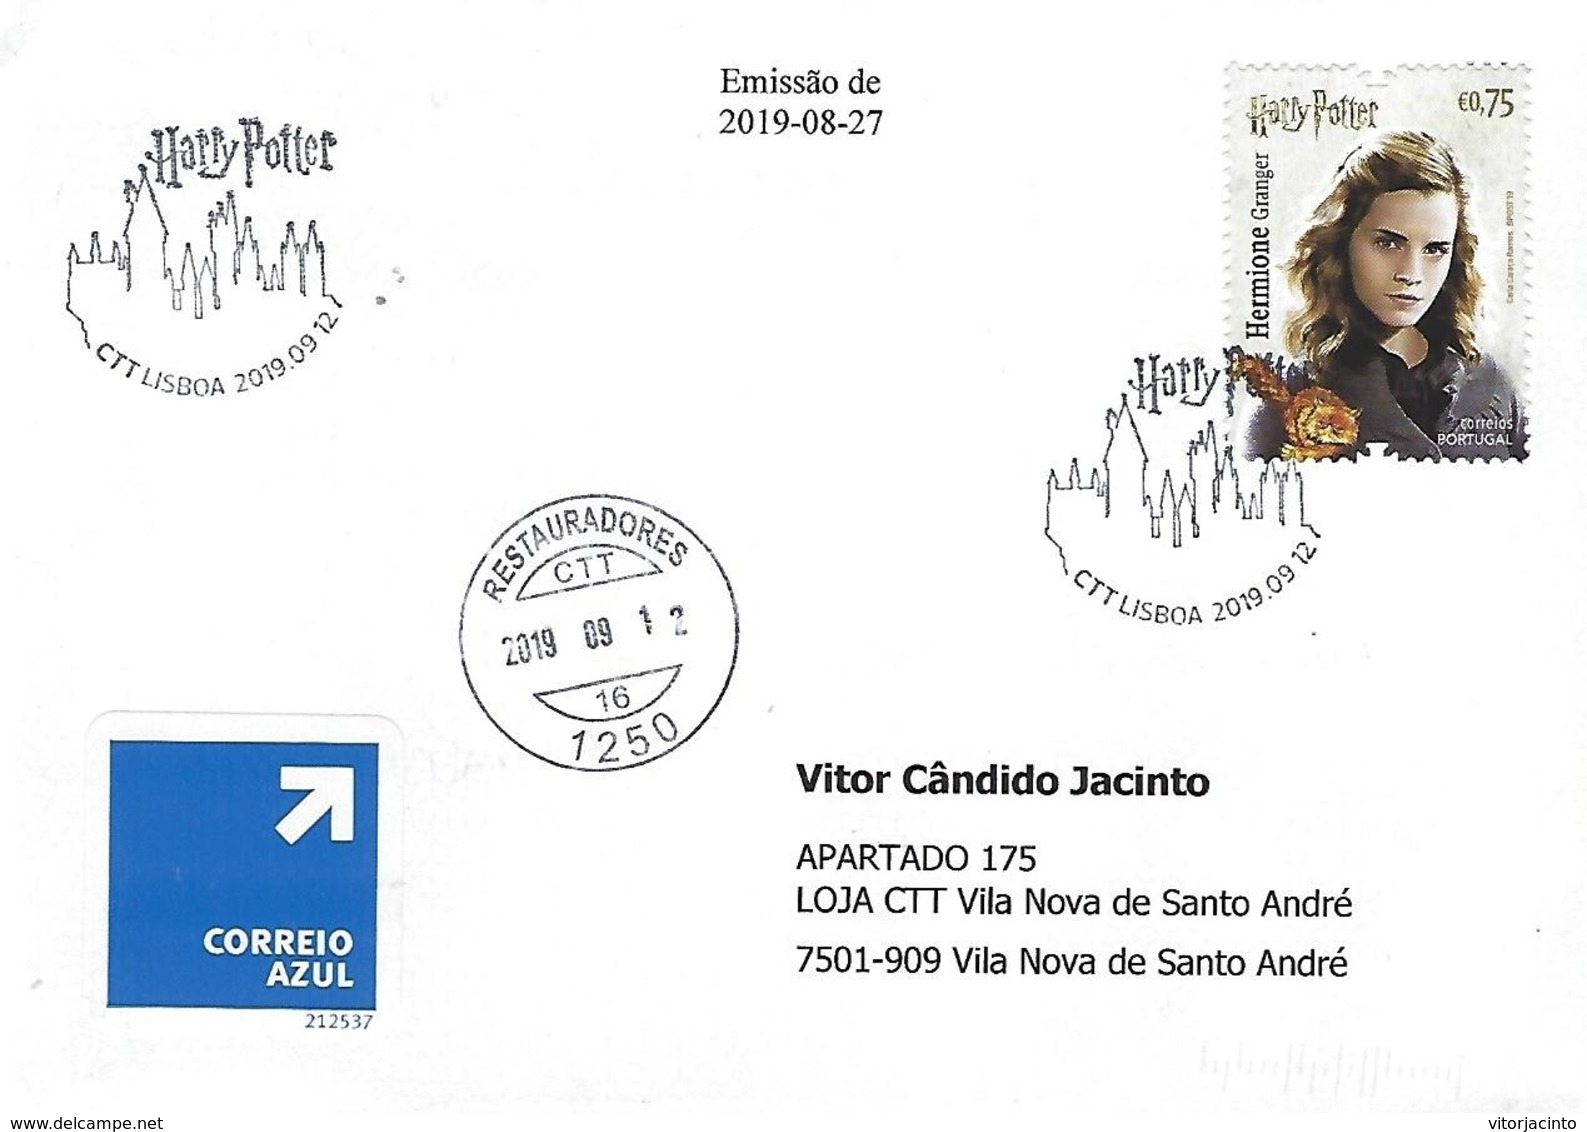 PORTUGAL - Harry Potter 2019 - Commemorative Postmark Above HPotter Stamps ~ Cover Real Circulated ~ - Postmark Collection